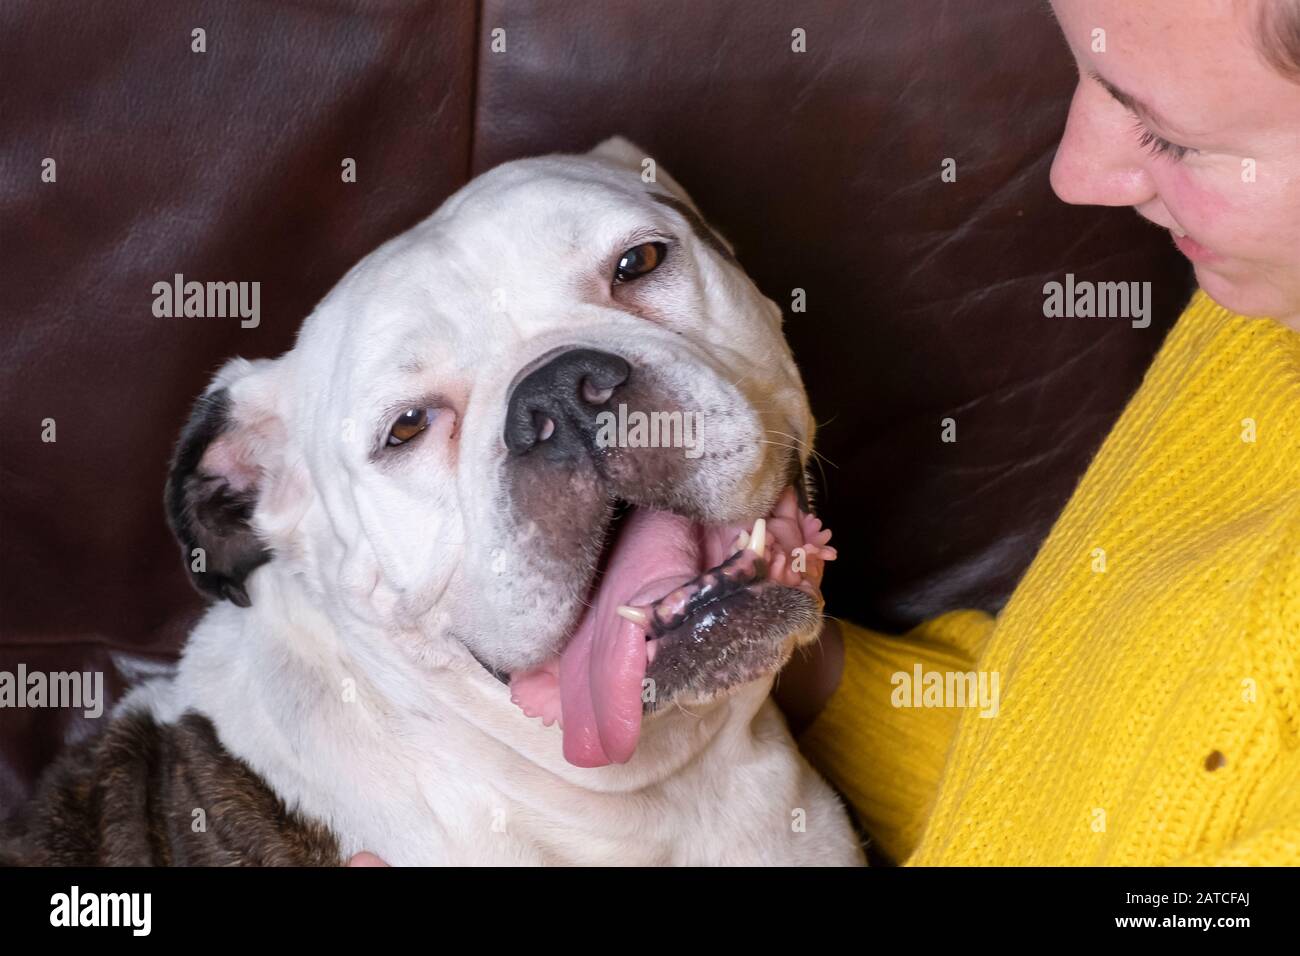 Girl holding Old English Bulldog, bulldog seems in love with the young woman. Stock Photo